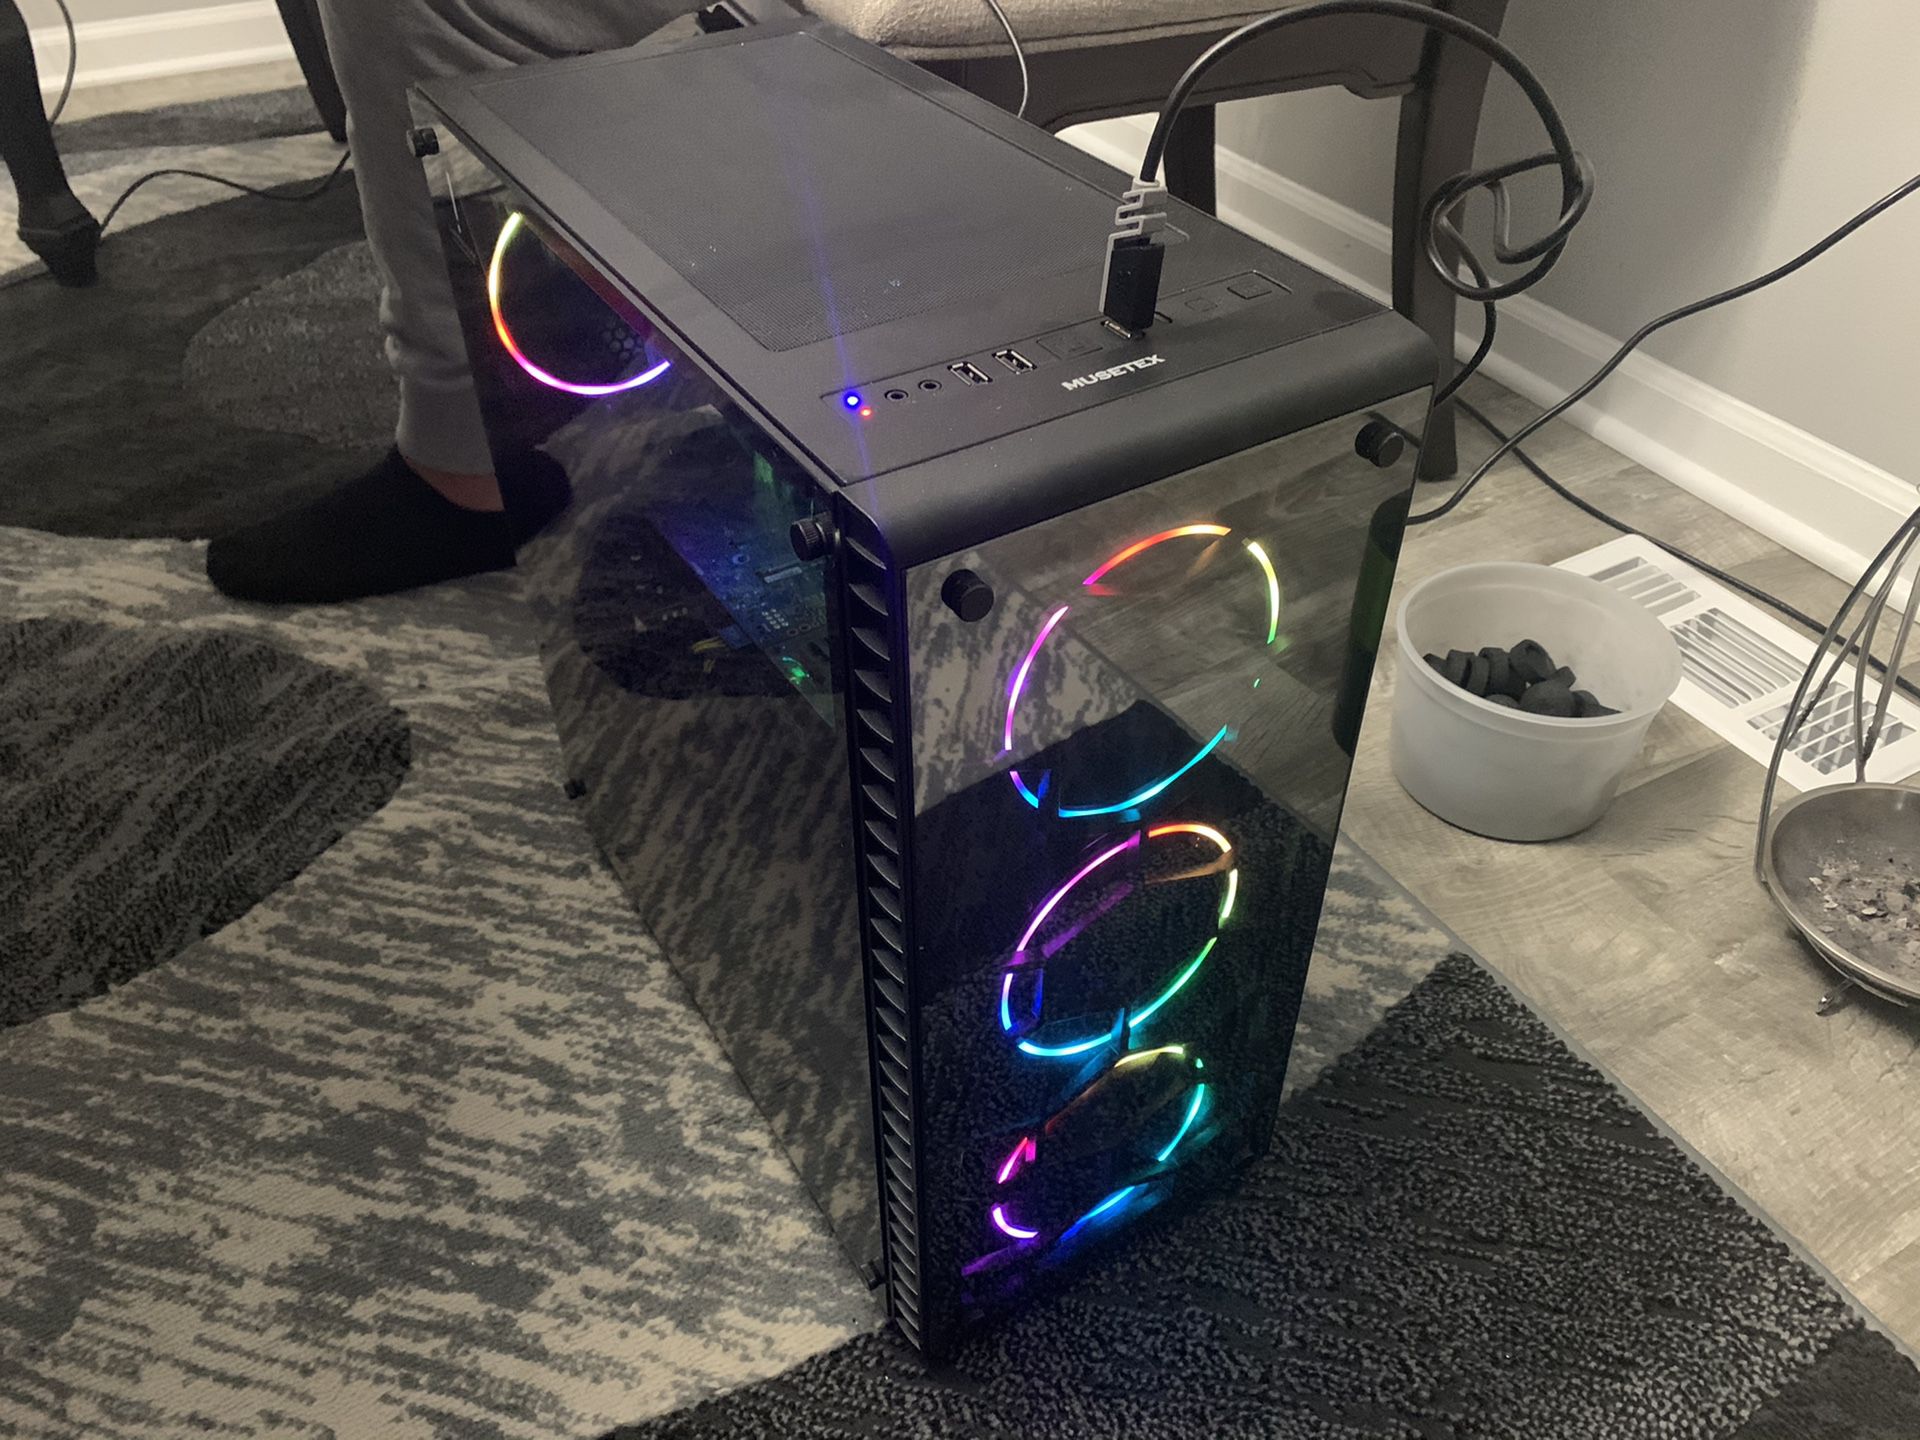 Custom built gaming computer with headset, mouse, keyboard